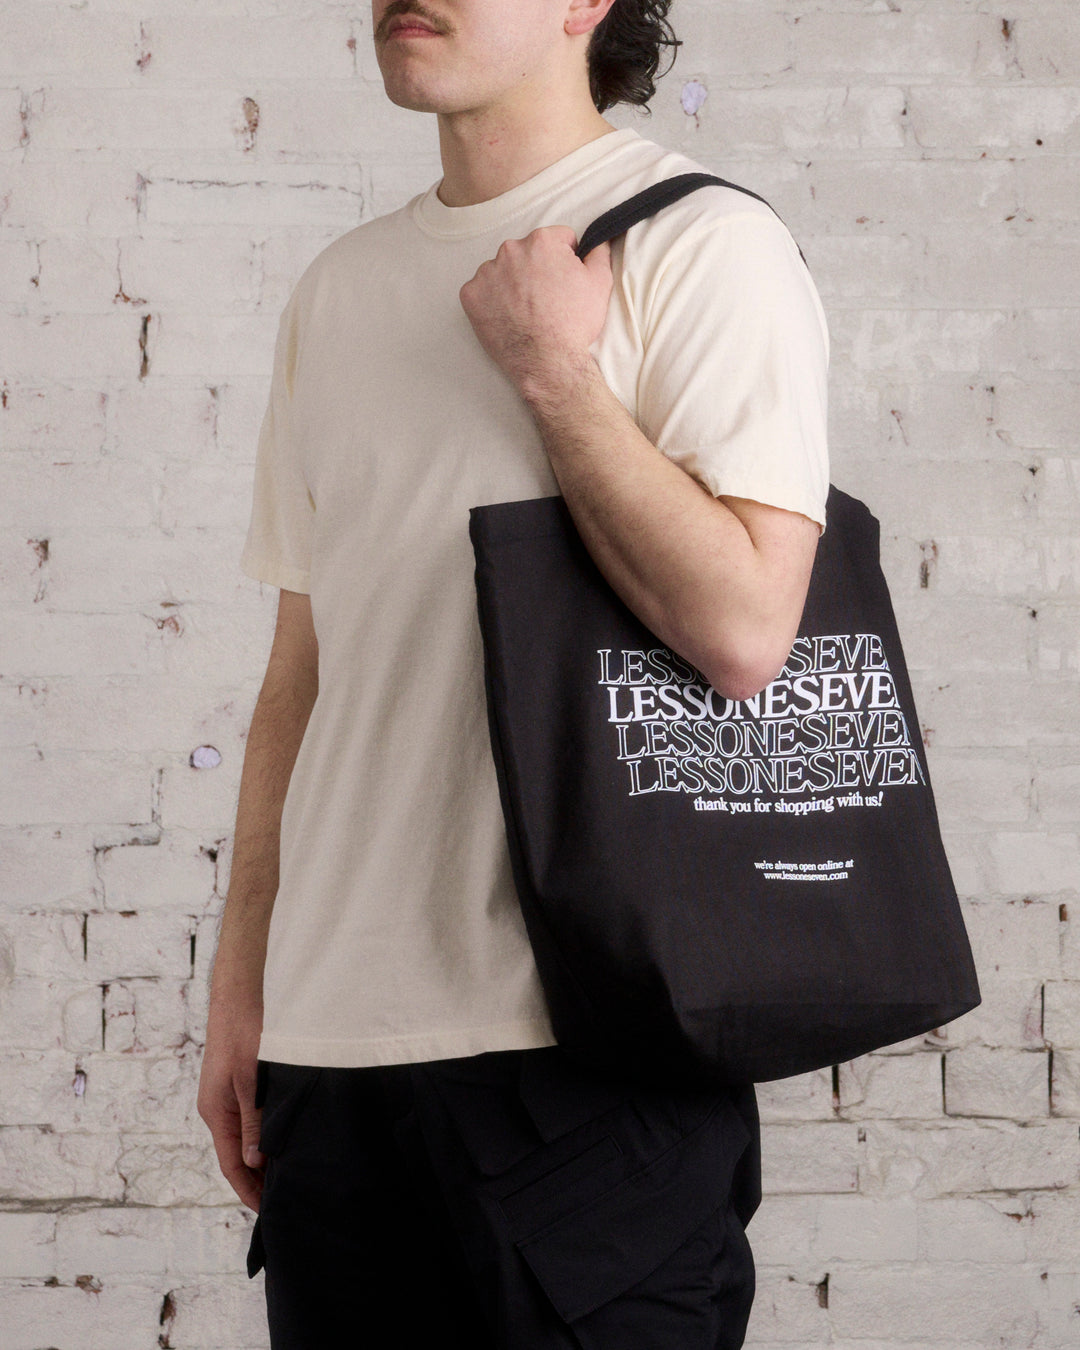 LESS 17 "Thank You" Tote Void